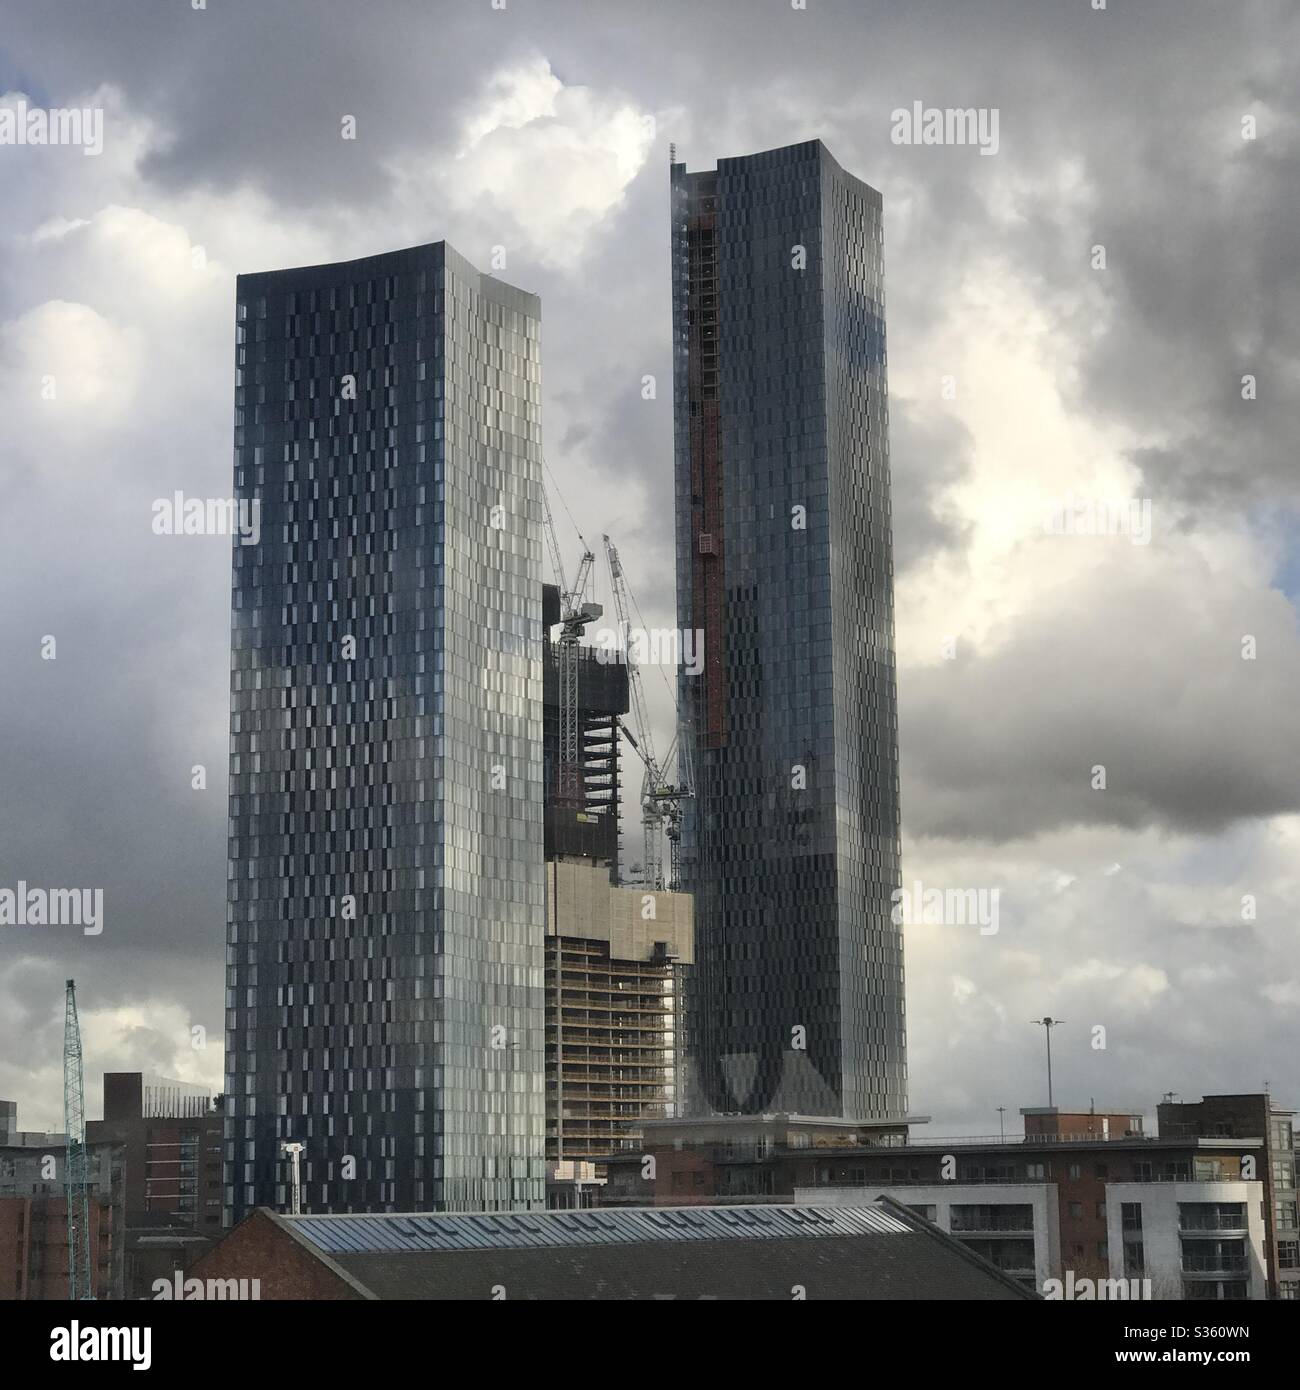 Deansgate Square West Tower, Deansgate Locks Stockfoto